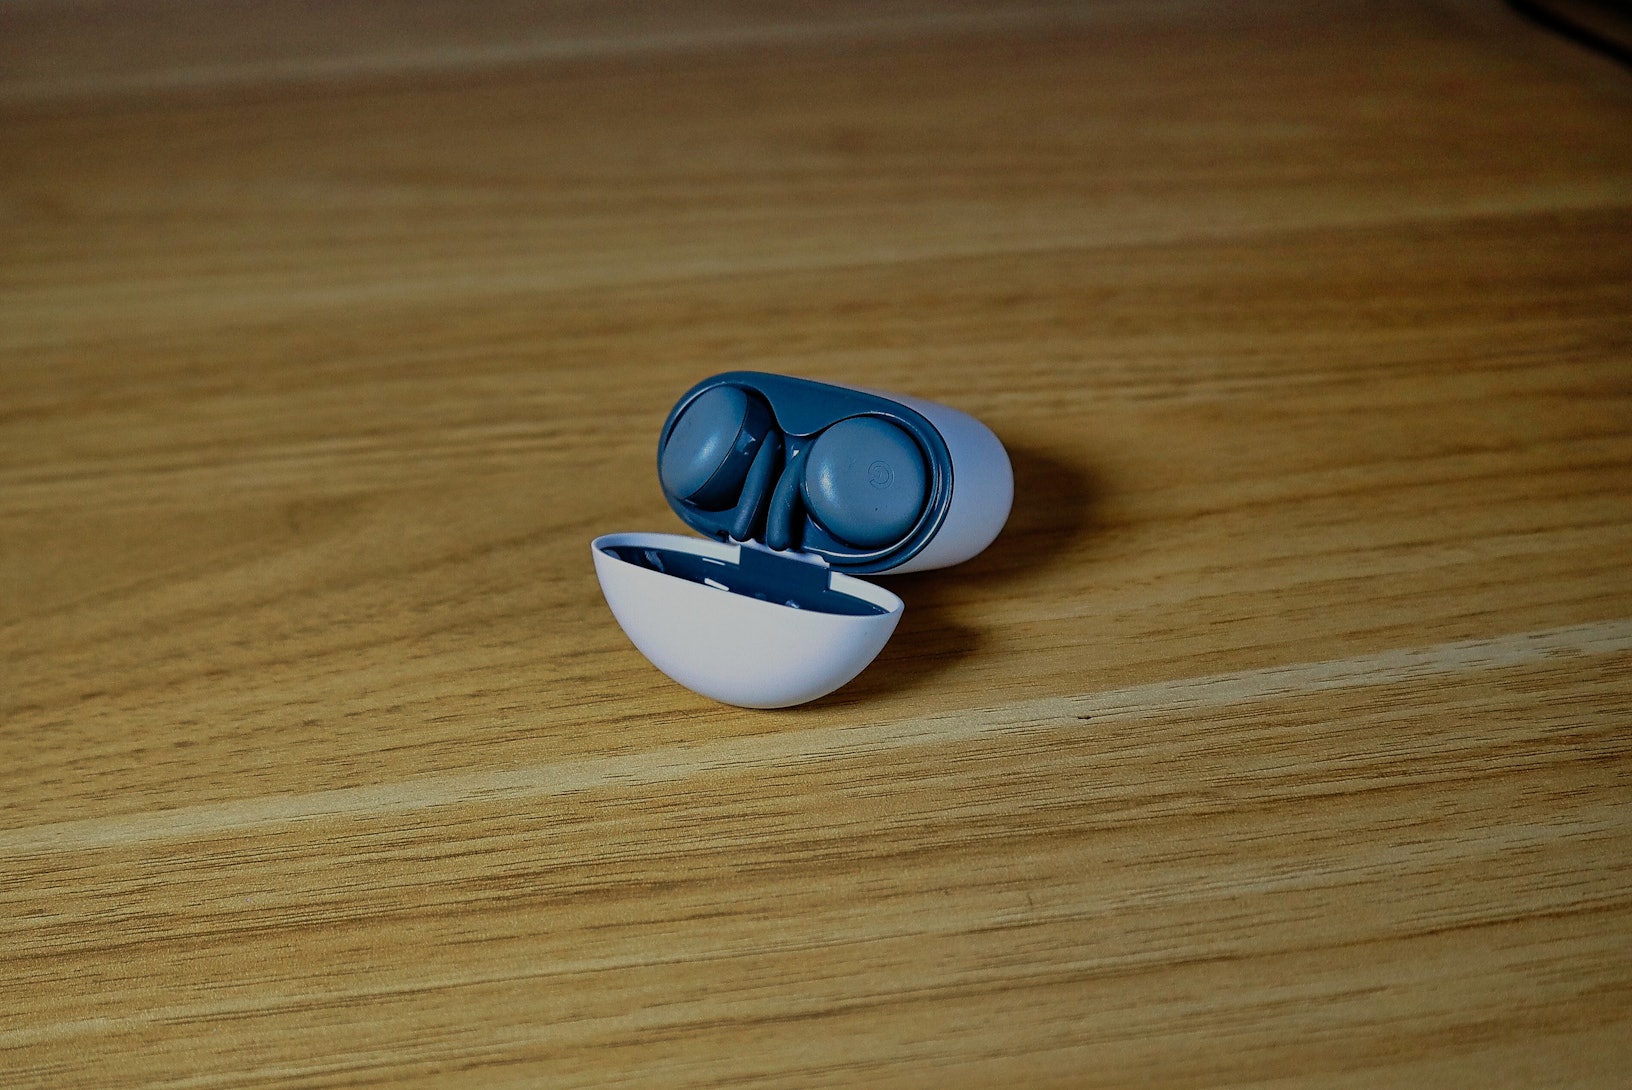 Google Pixel Buds Series-A review: Google's third try at true wireless earbuds nails it